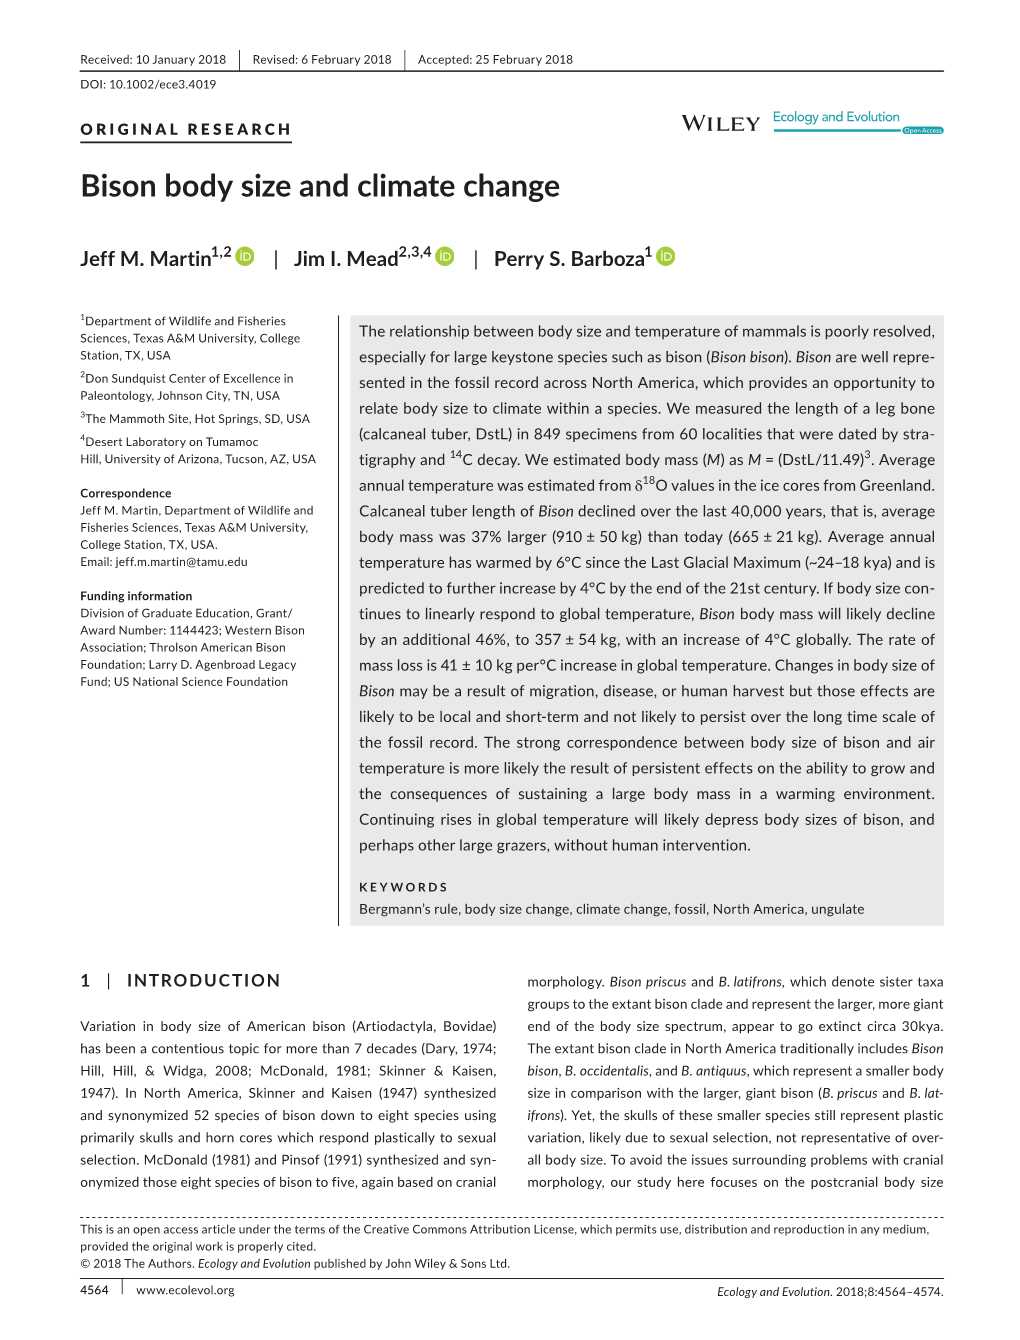 Bison Body Size and Climate Change